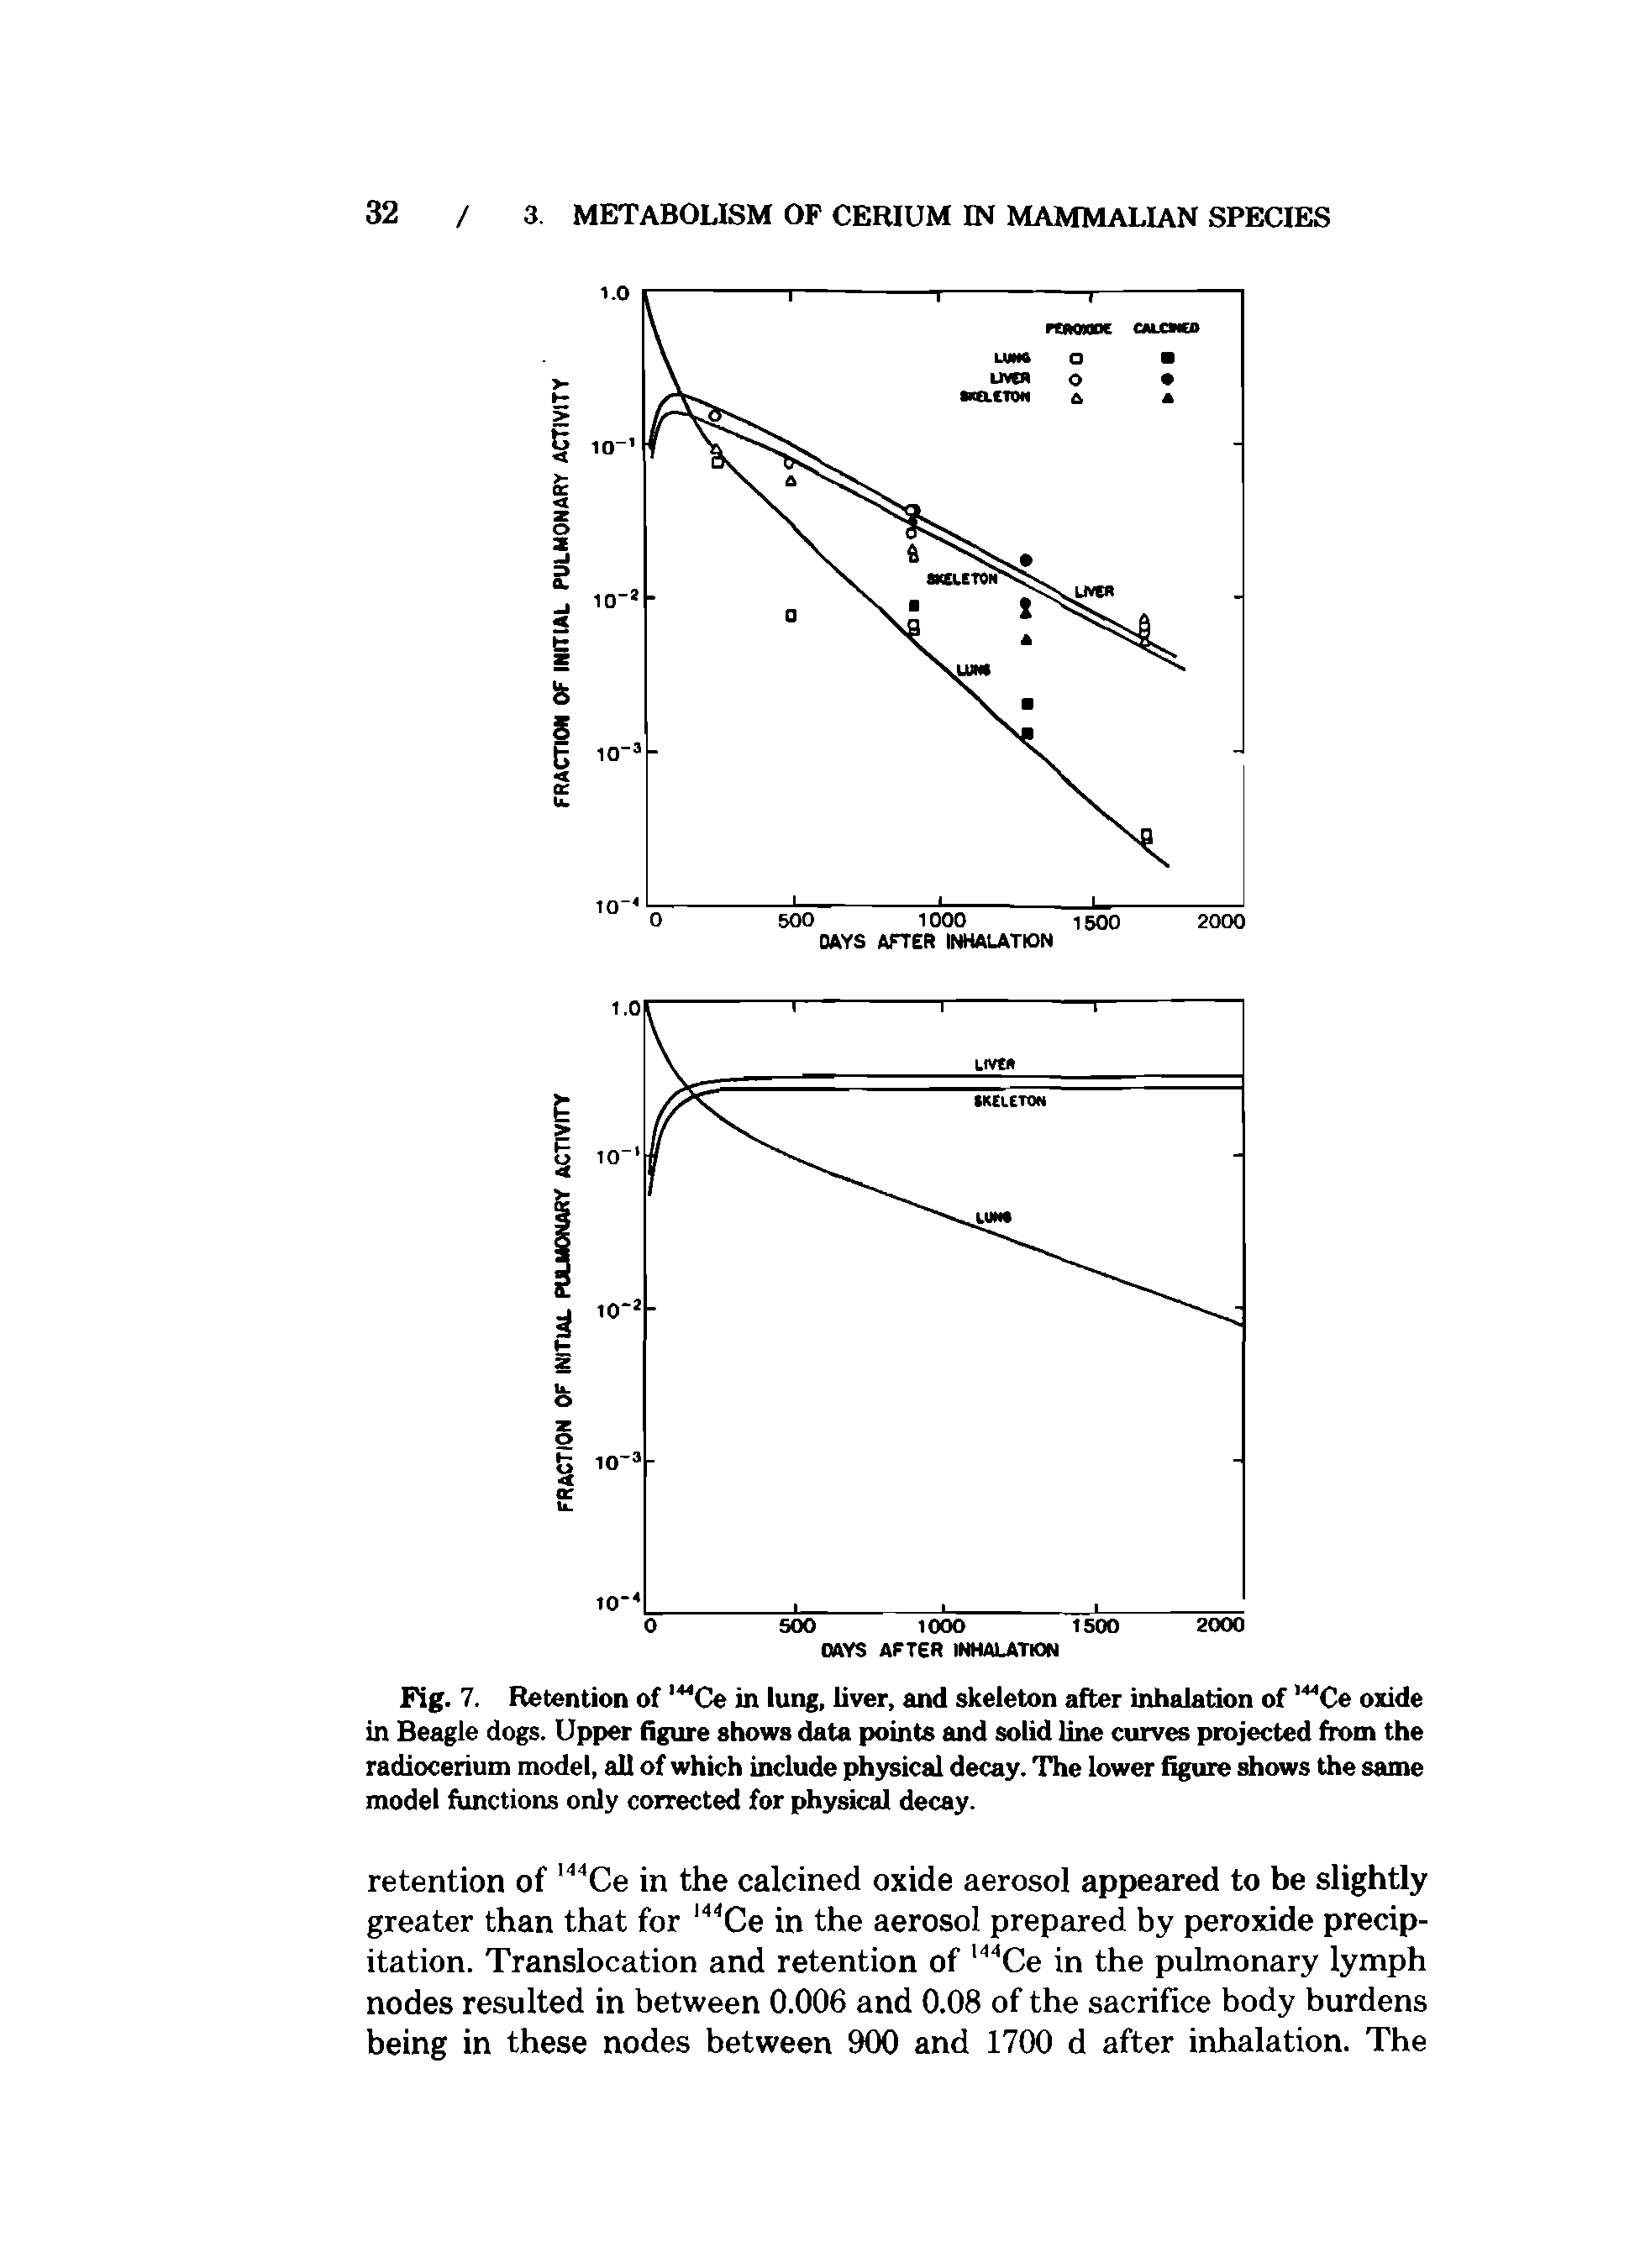 Fig. 7. Retention of mCe in lung, liver, and skeleton after inhalation of 1,MCe oxide in Beagle dogs. Upper figure shows data points and solid line curves projected from the radiocerium model, all of which include physical decay. The lower figure shows the same model functions only corrected for physical decay.